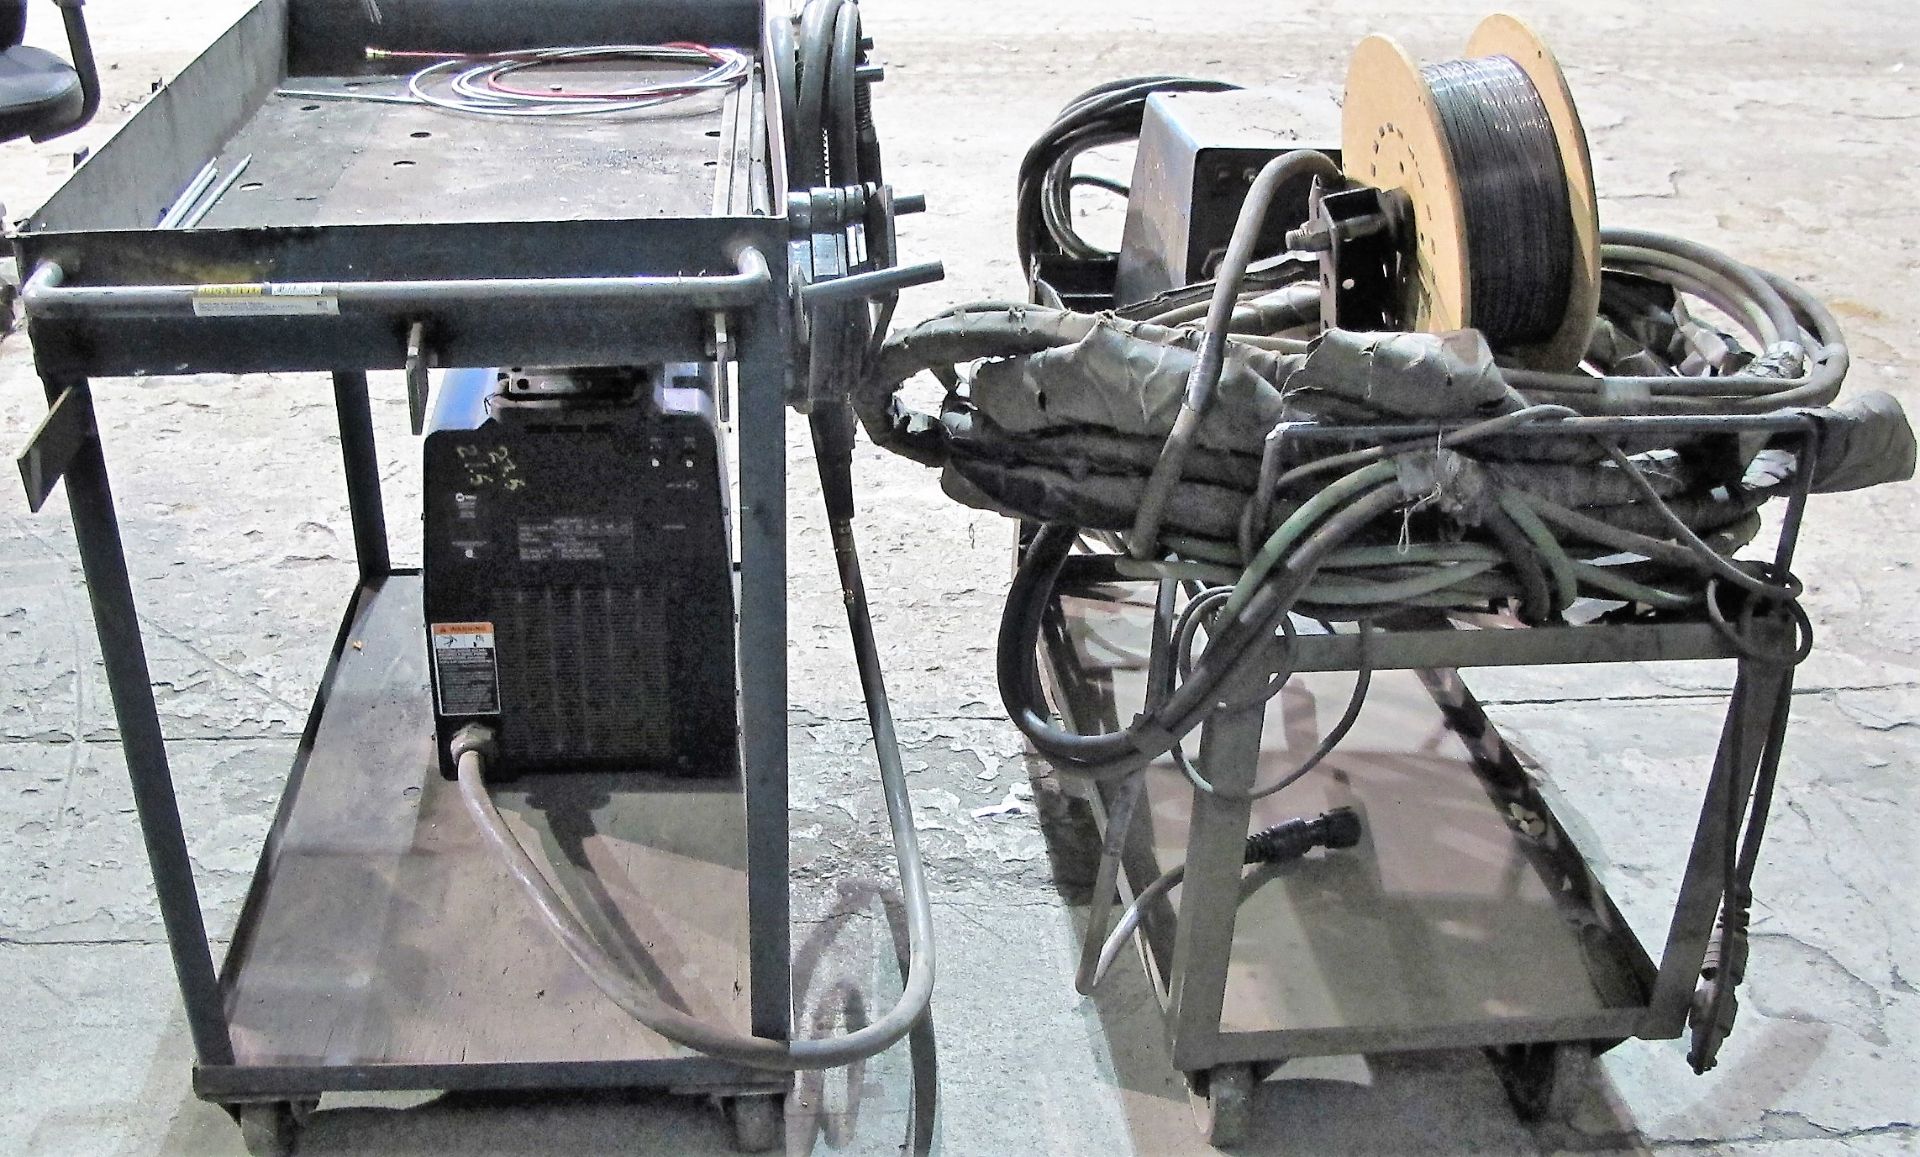 MILLER XMT 350 CC/CW WELDER, S/N LF096946 W/ MILLER 22A WIRE FEEDER, CABLES & CART - Image 4 of 4